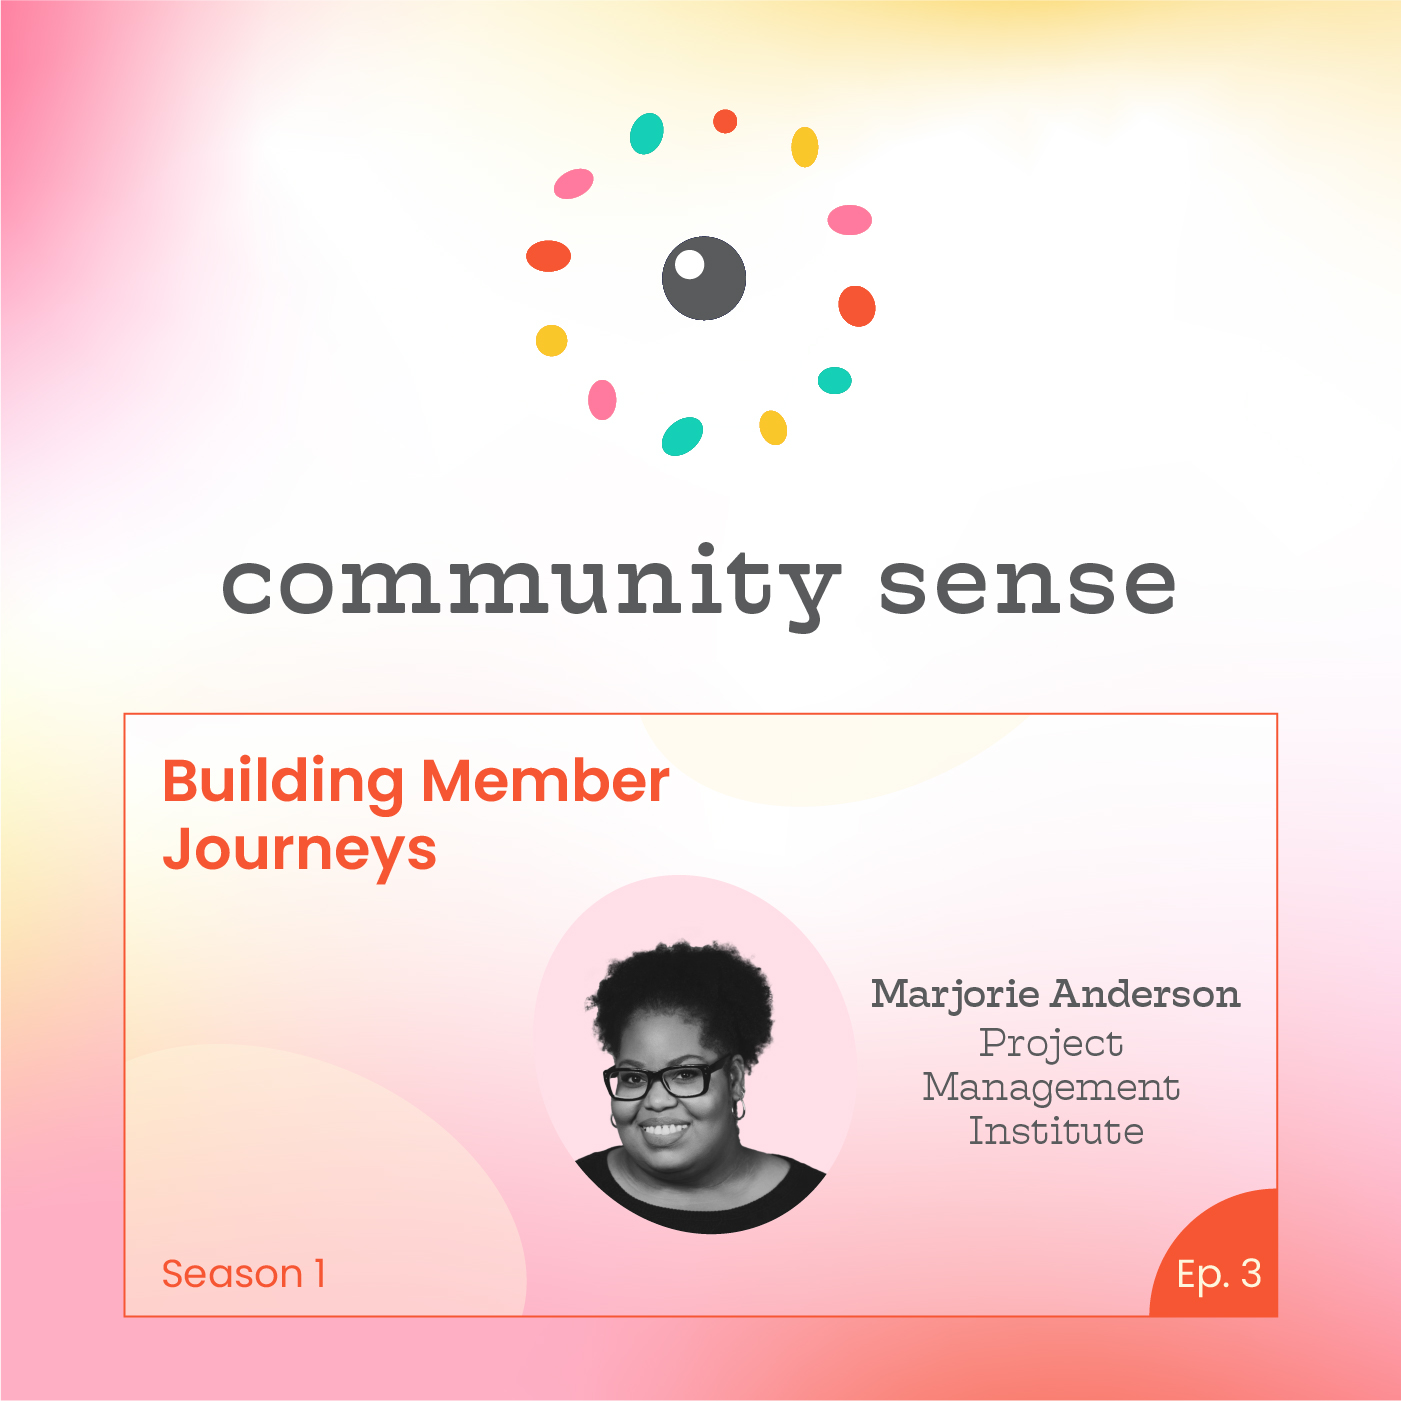 Building Member Journeys with Marjorie Anderson at PMI